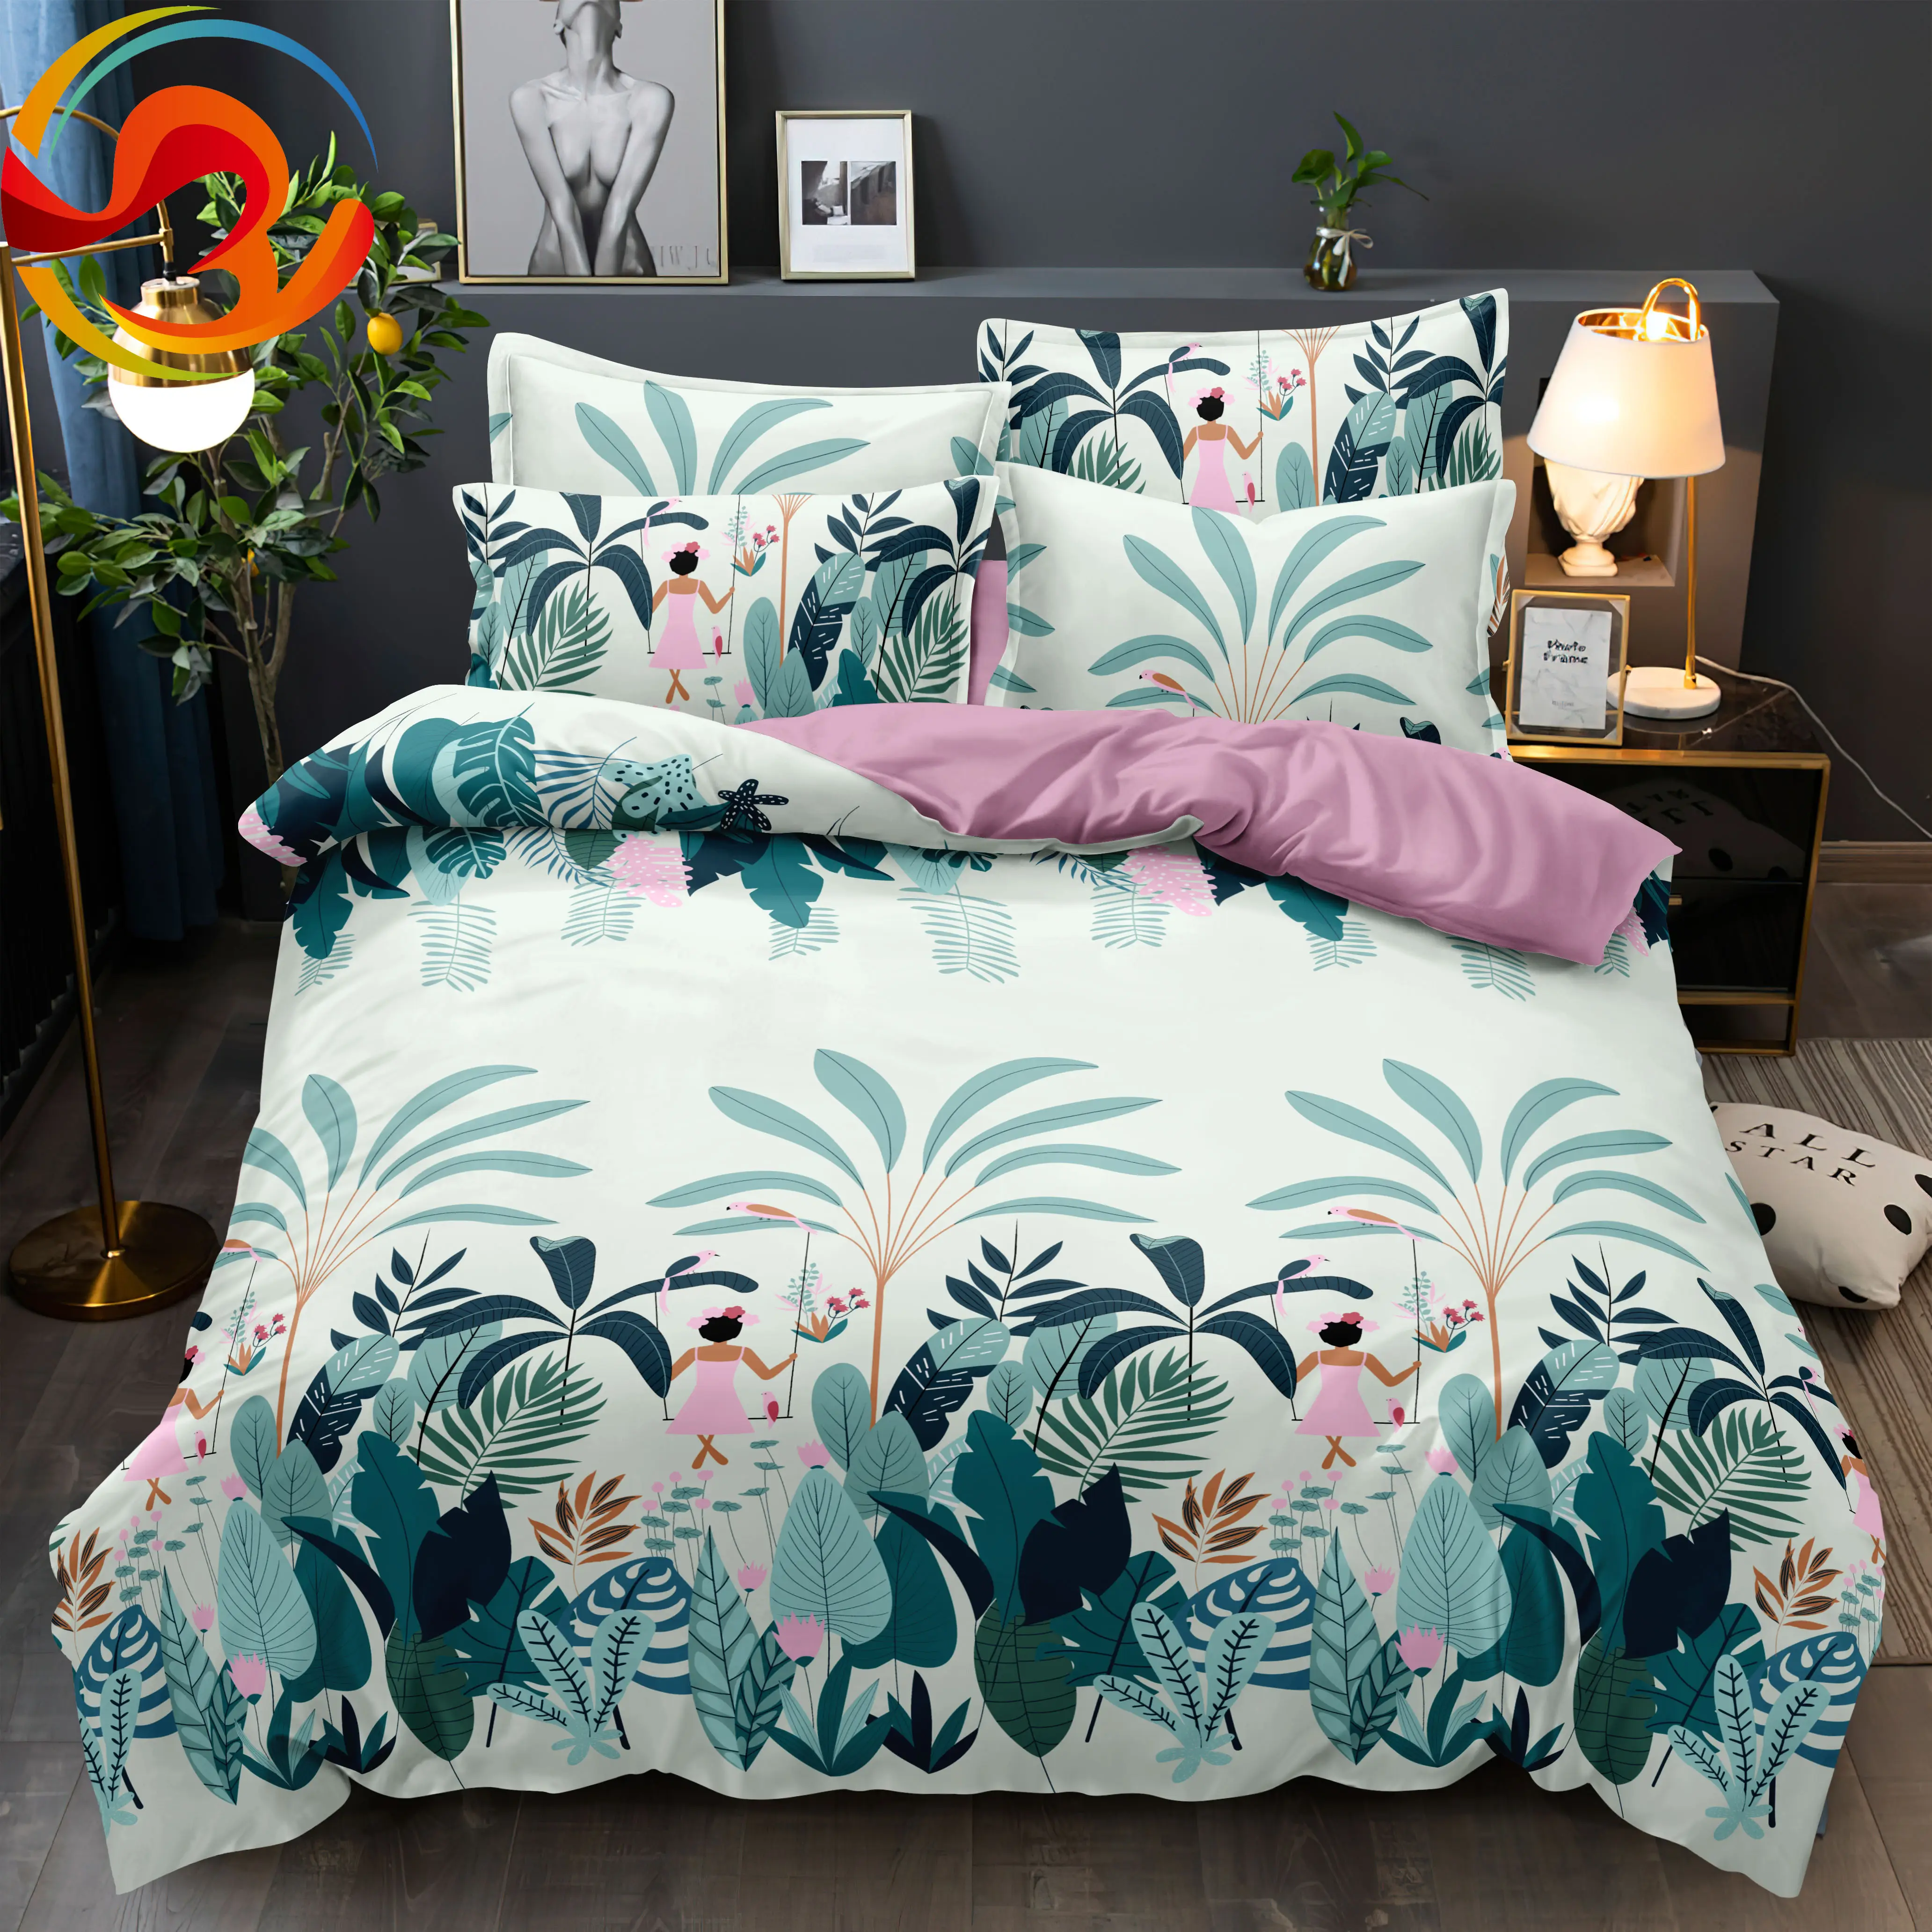 bed sheet curtain fabric disperse printing 100% polyester fabric for home textile bedding set pillow case